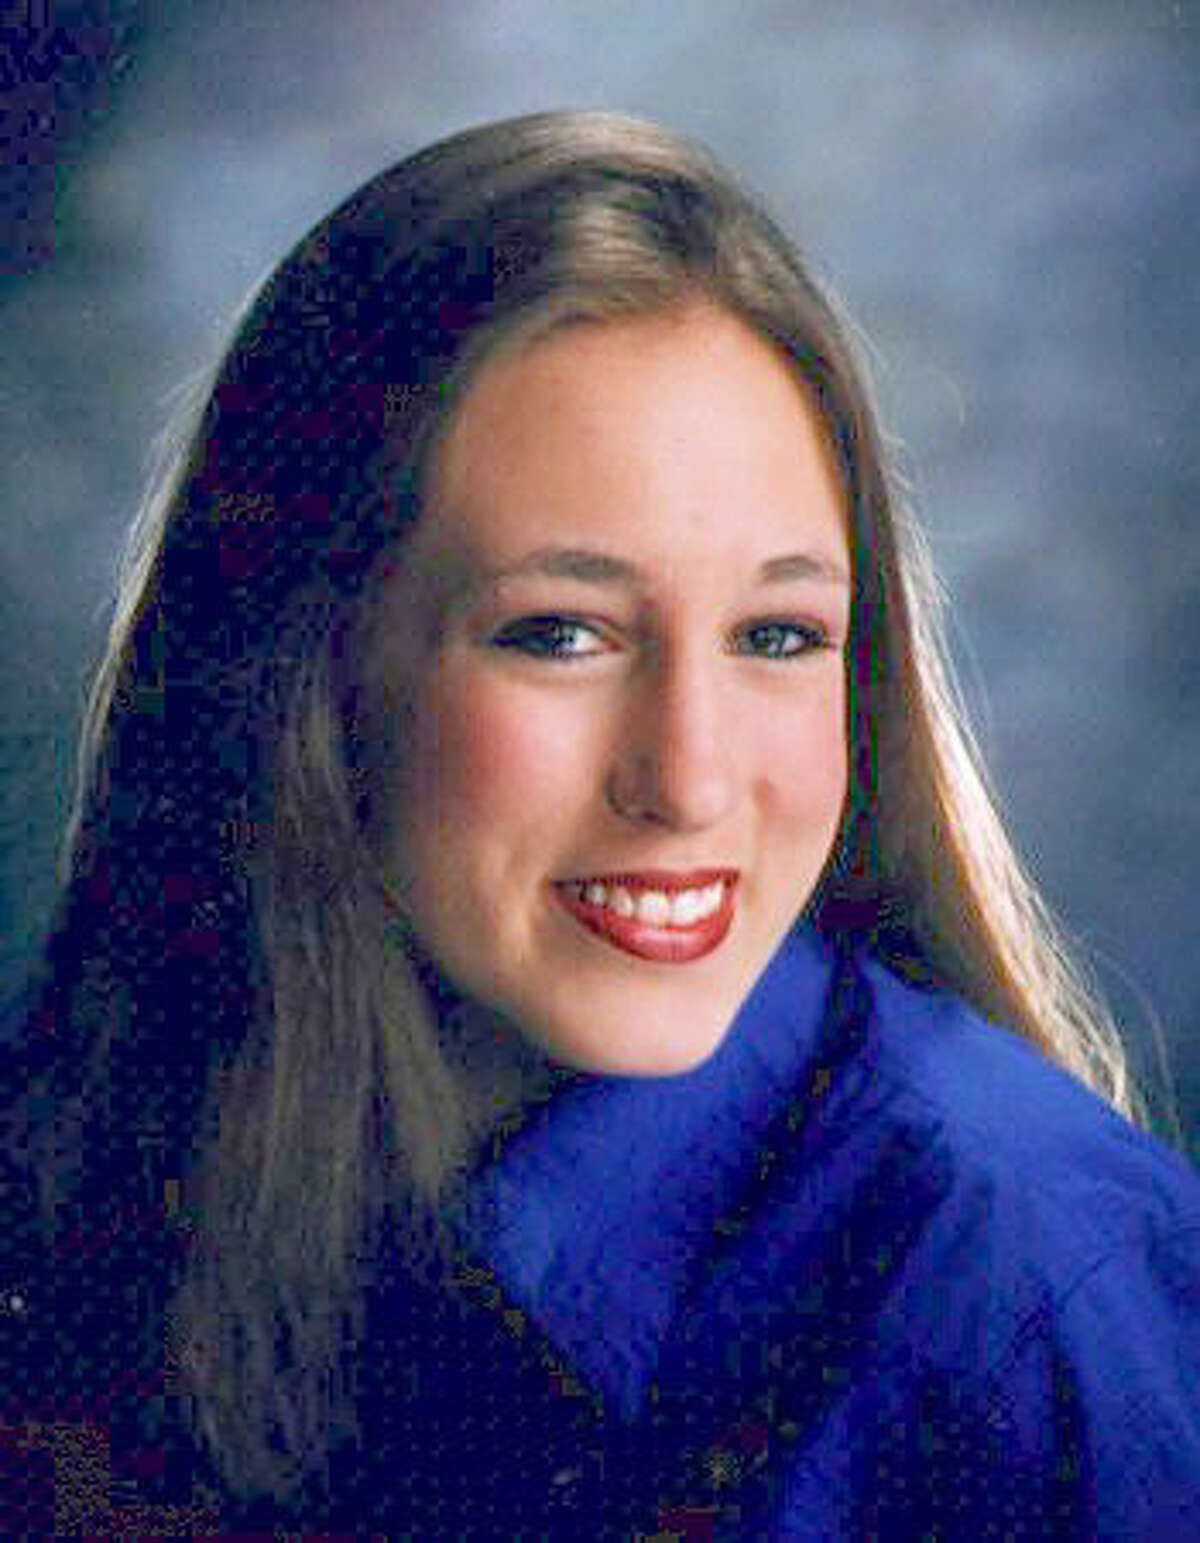 Nineteen-year-old Melissa Trotter was strangled by Swearingen after disappearing on Dec. 8, 1998.